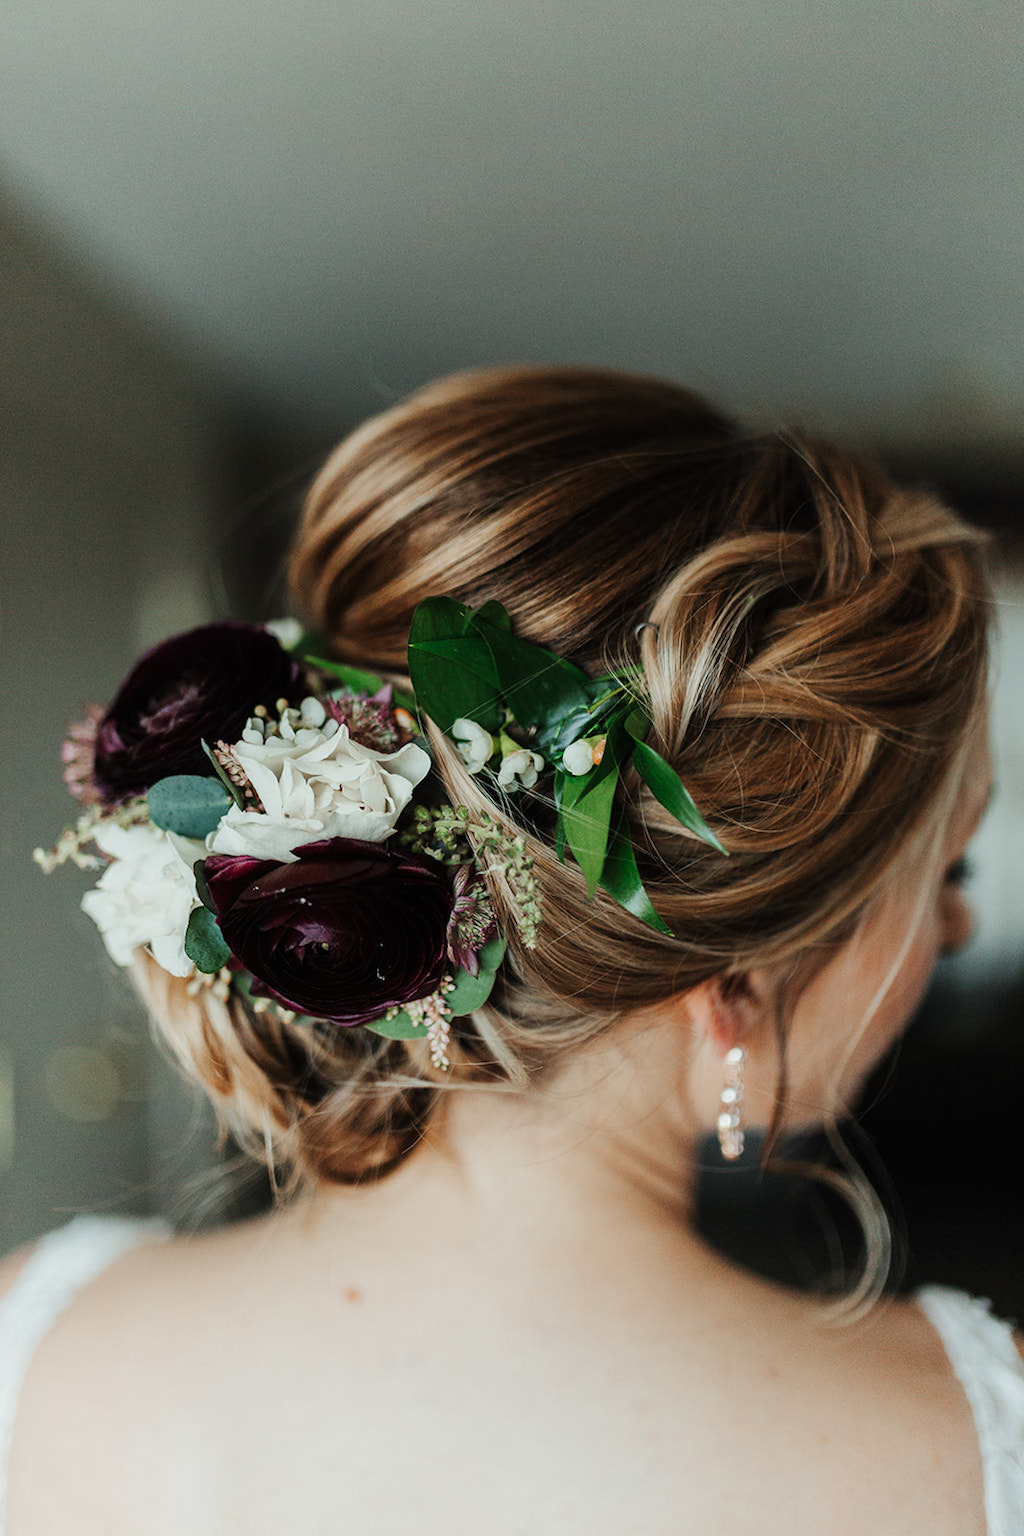 Garden Chic Inspired Dark Purple, Ivory and Greenery Floral Hair Accessory and Braided Updo Wedding Hairstyle | Tampa Bay Hair and Makeup Artist Femme Akoi